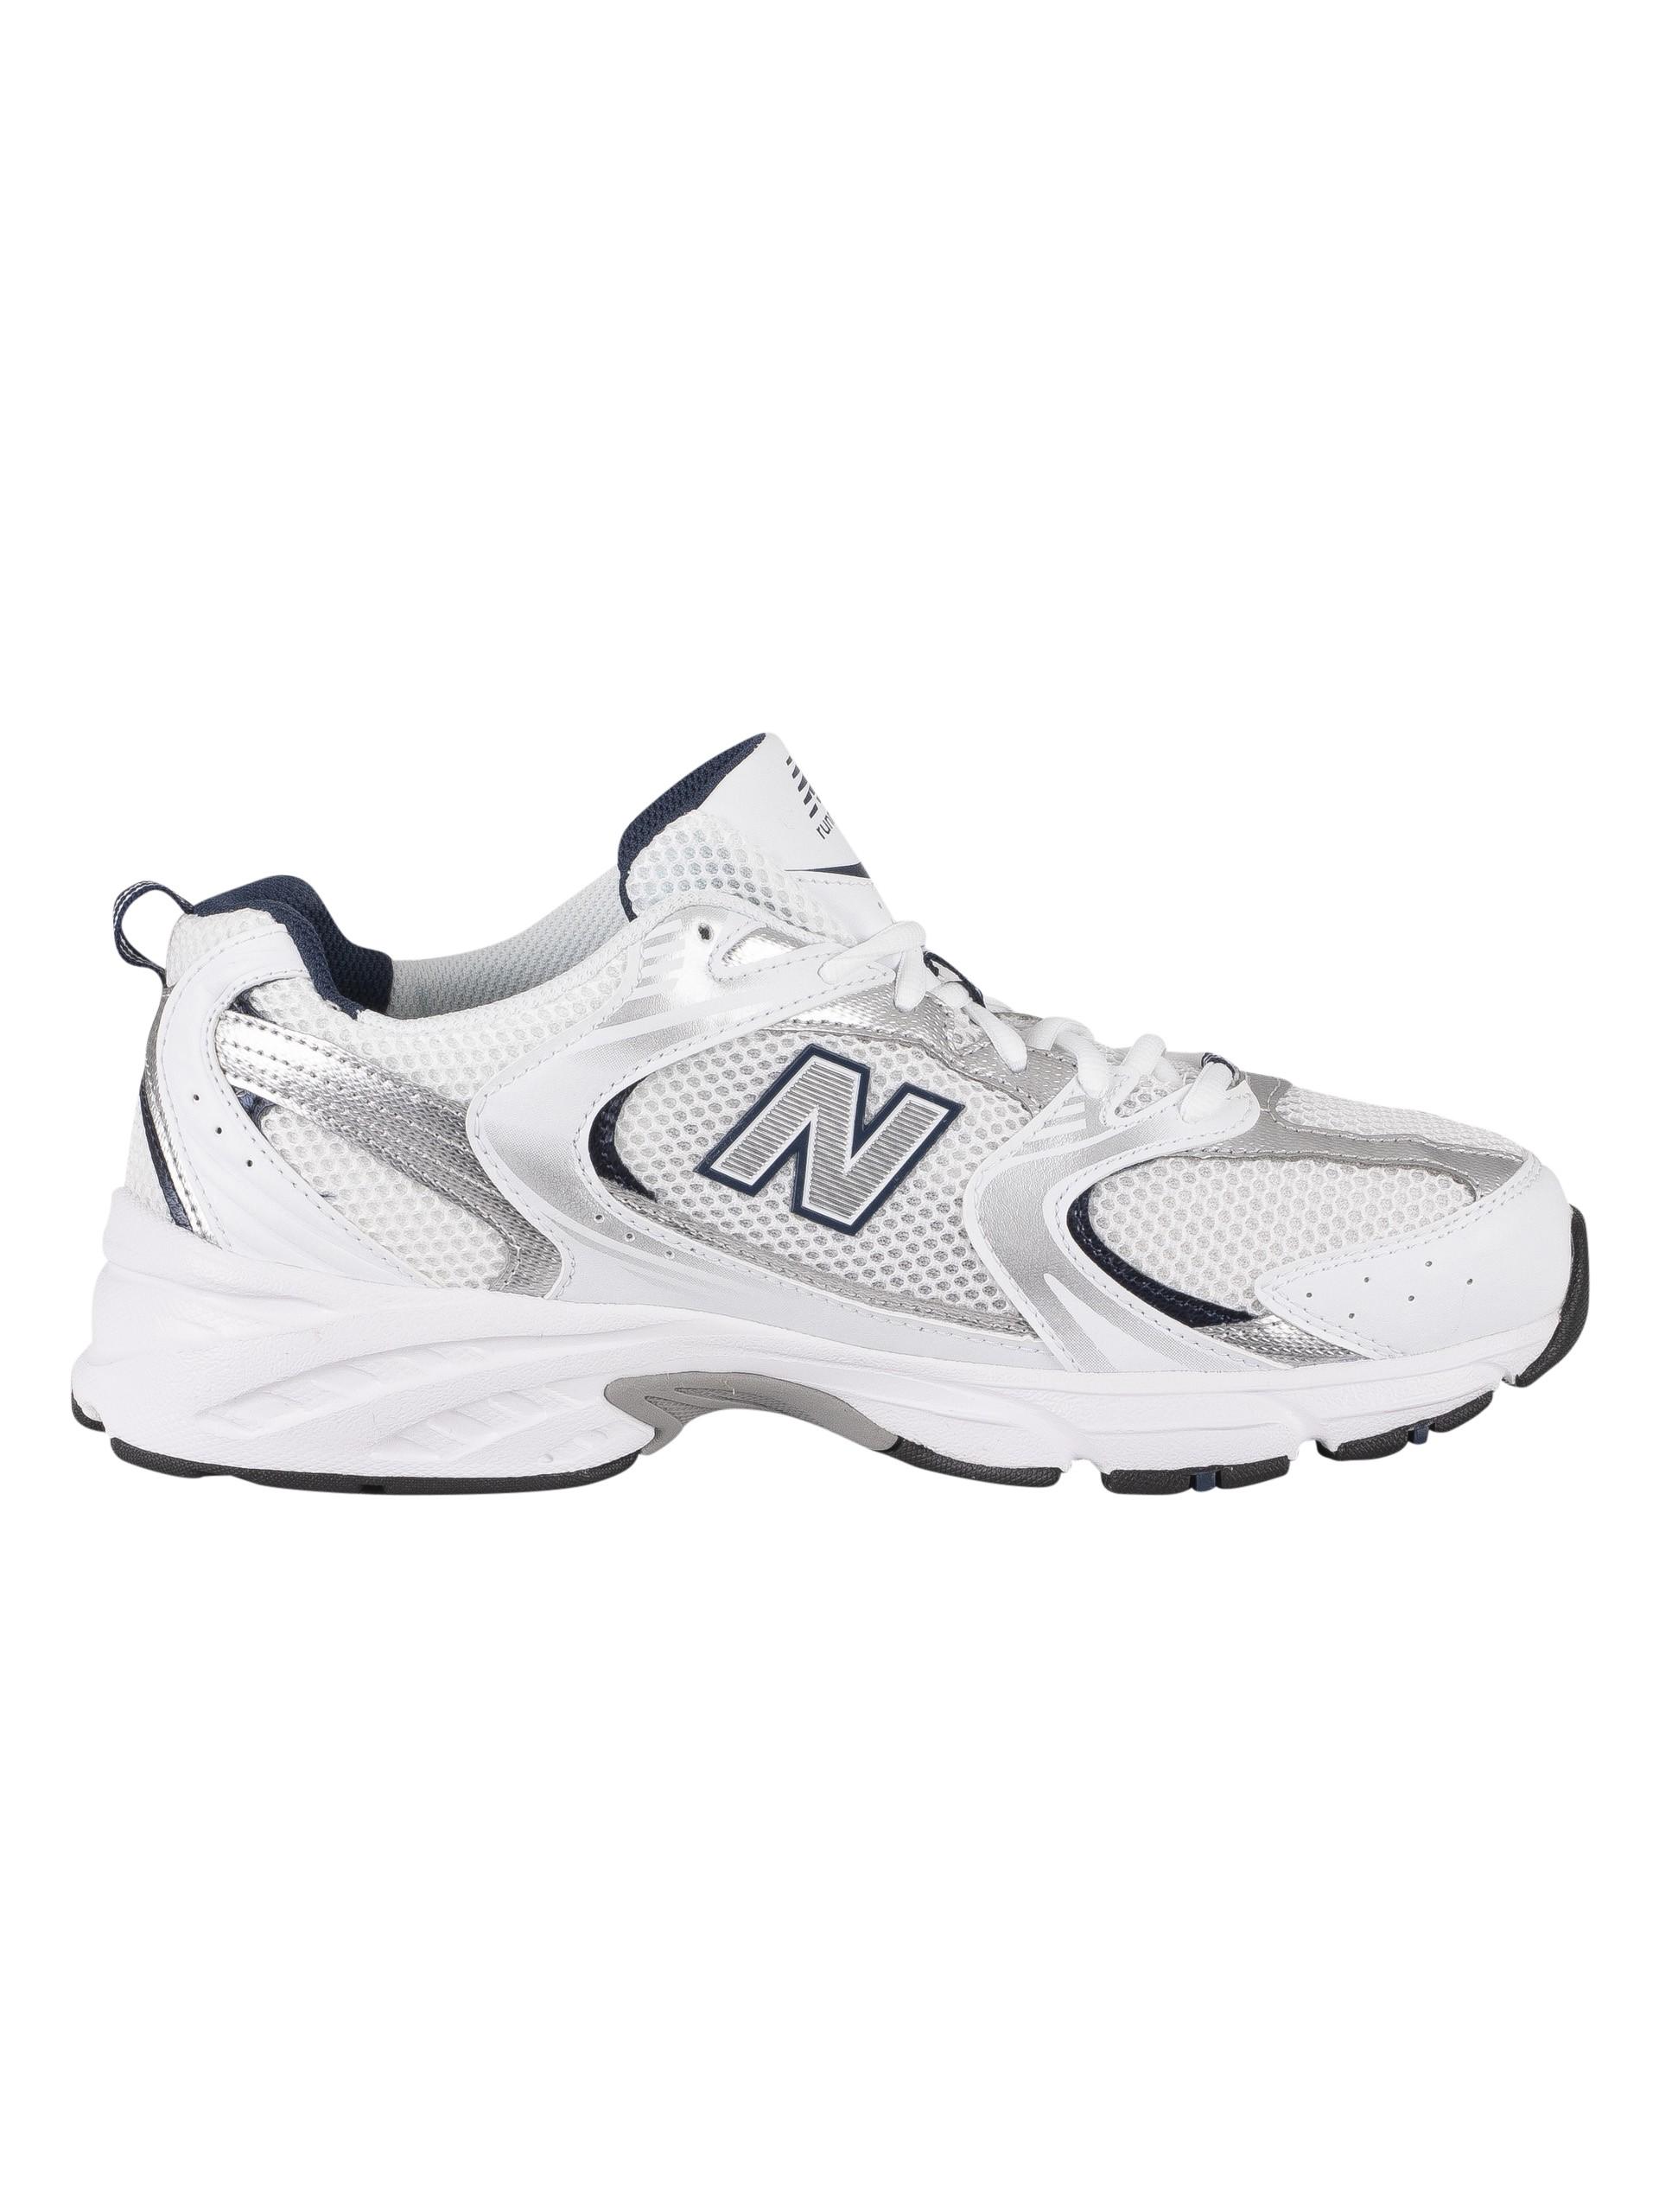 New Balance Suede 530 Trainers in White/Natural Indigo (White) for Men ...